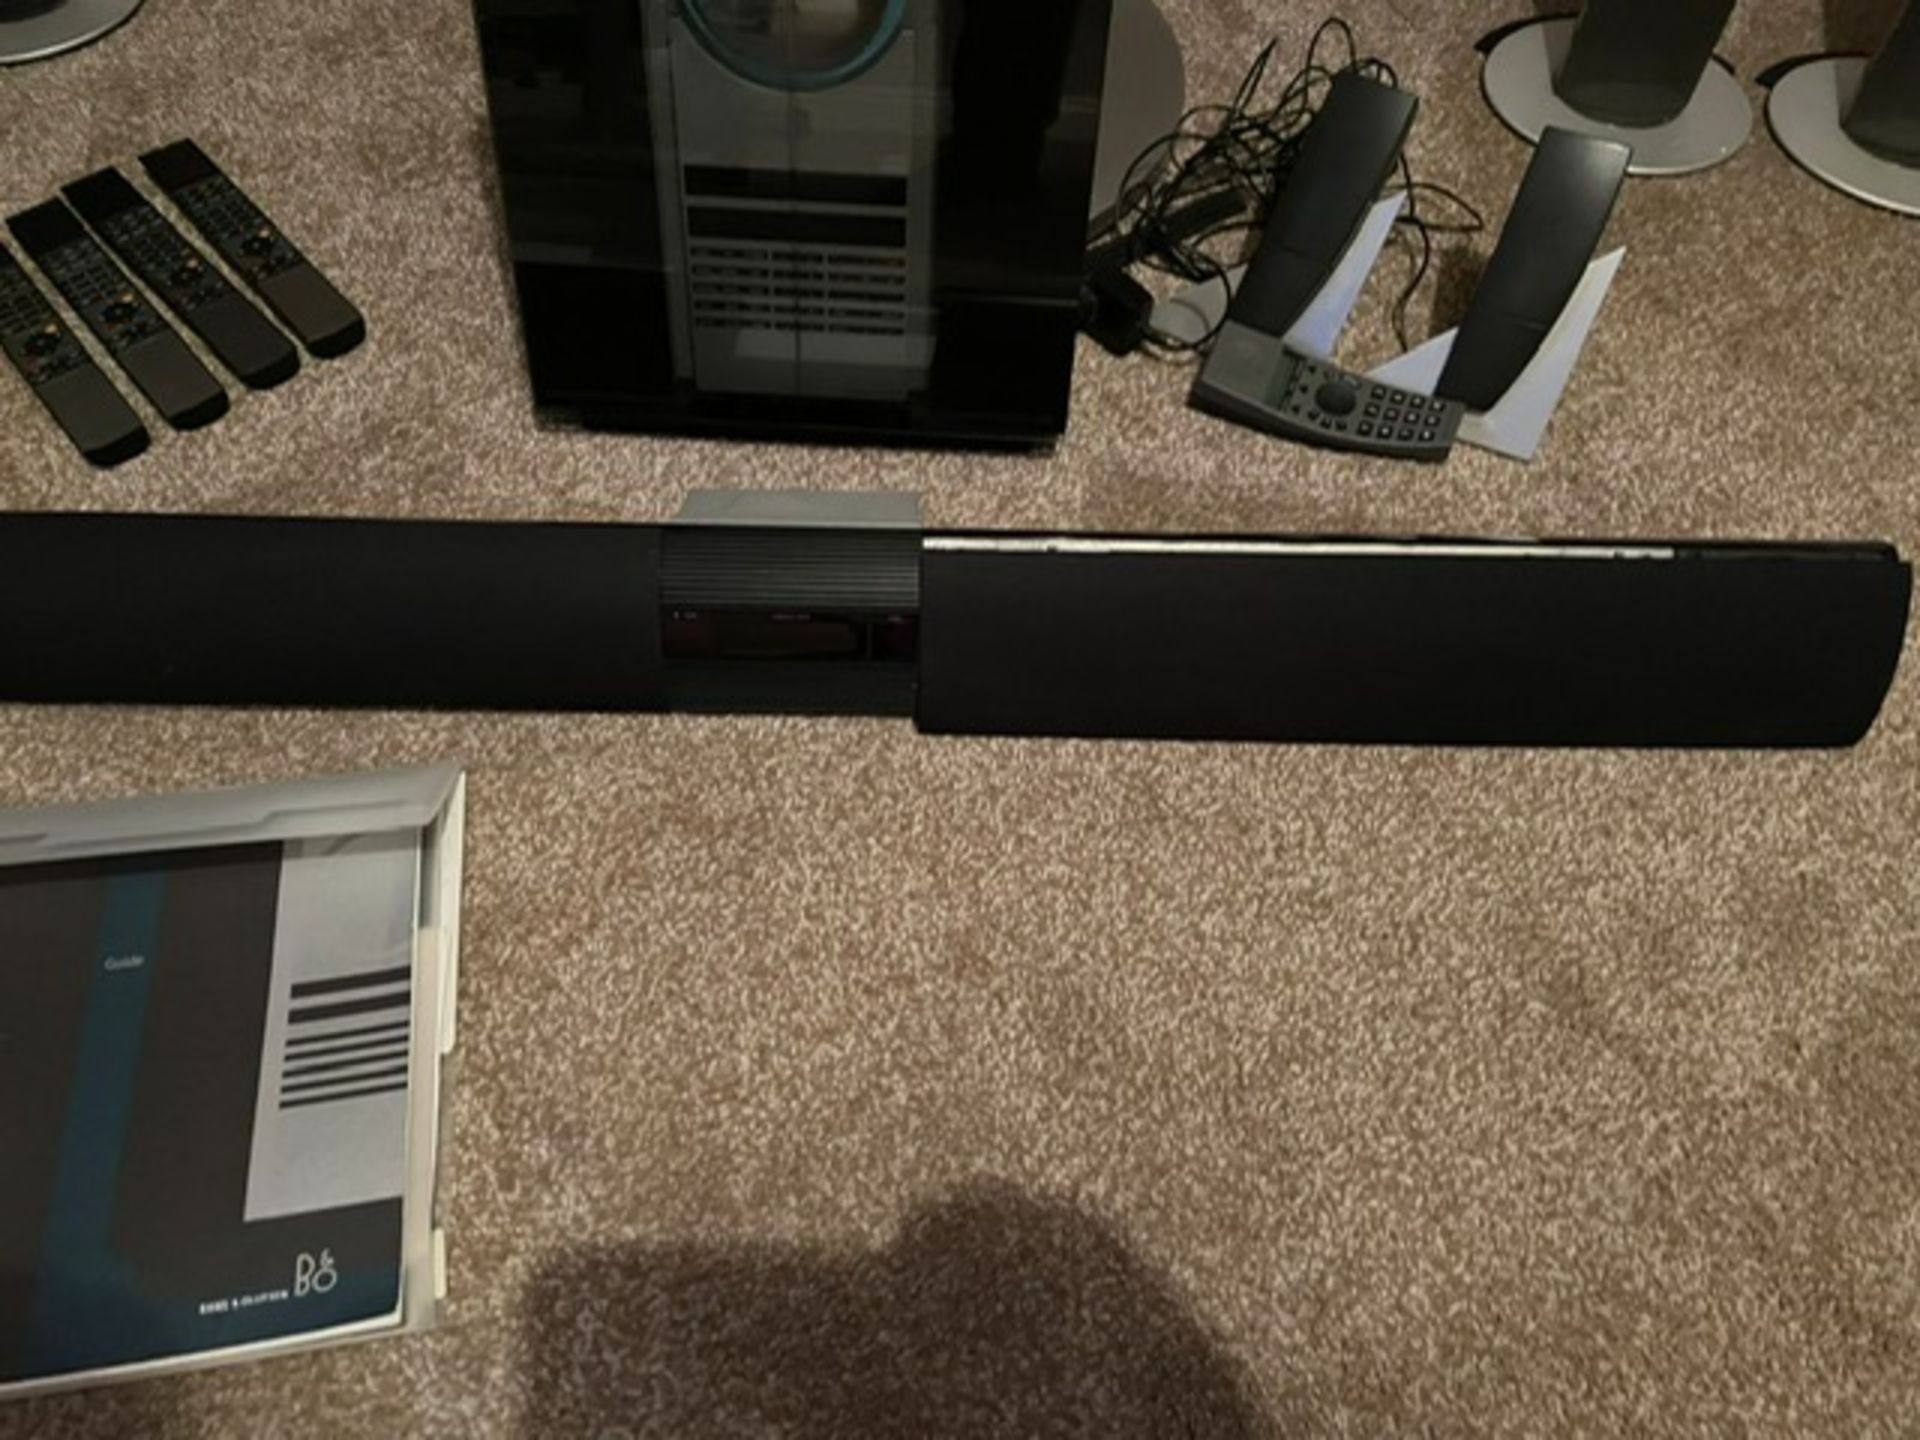 BANG & OLUFSEN TV & WIRELESS MUSIC SYSTEM- BEOLINK - Image 8 of 9